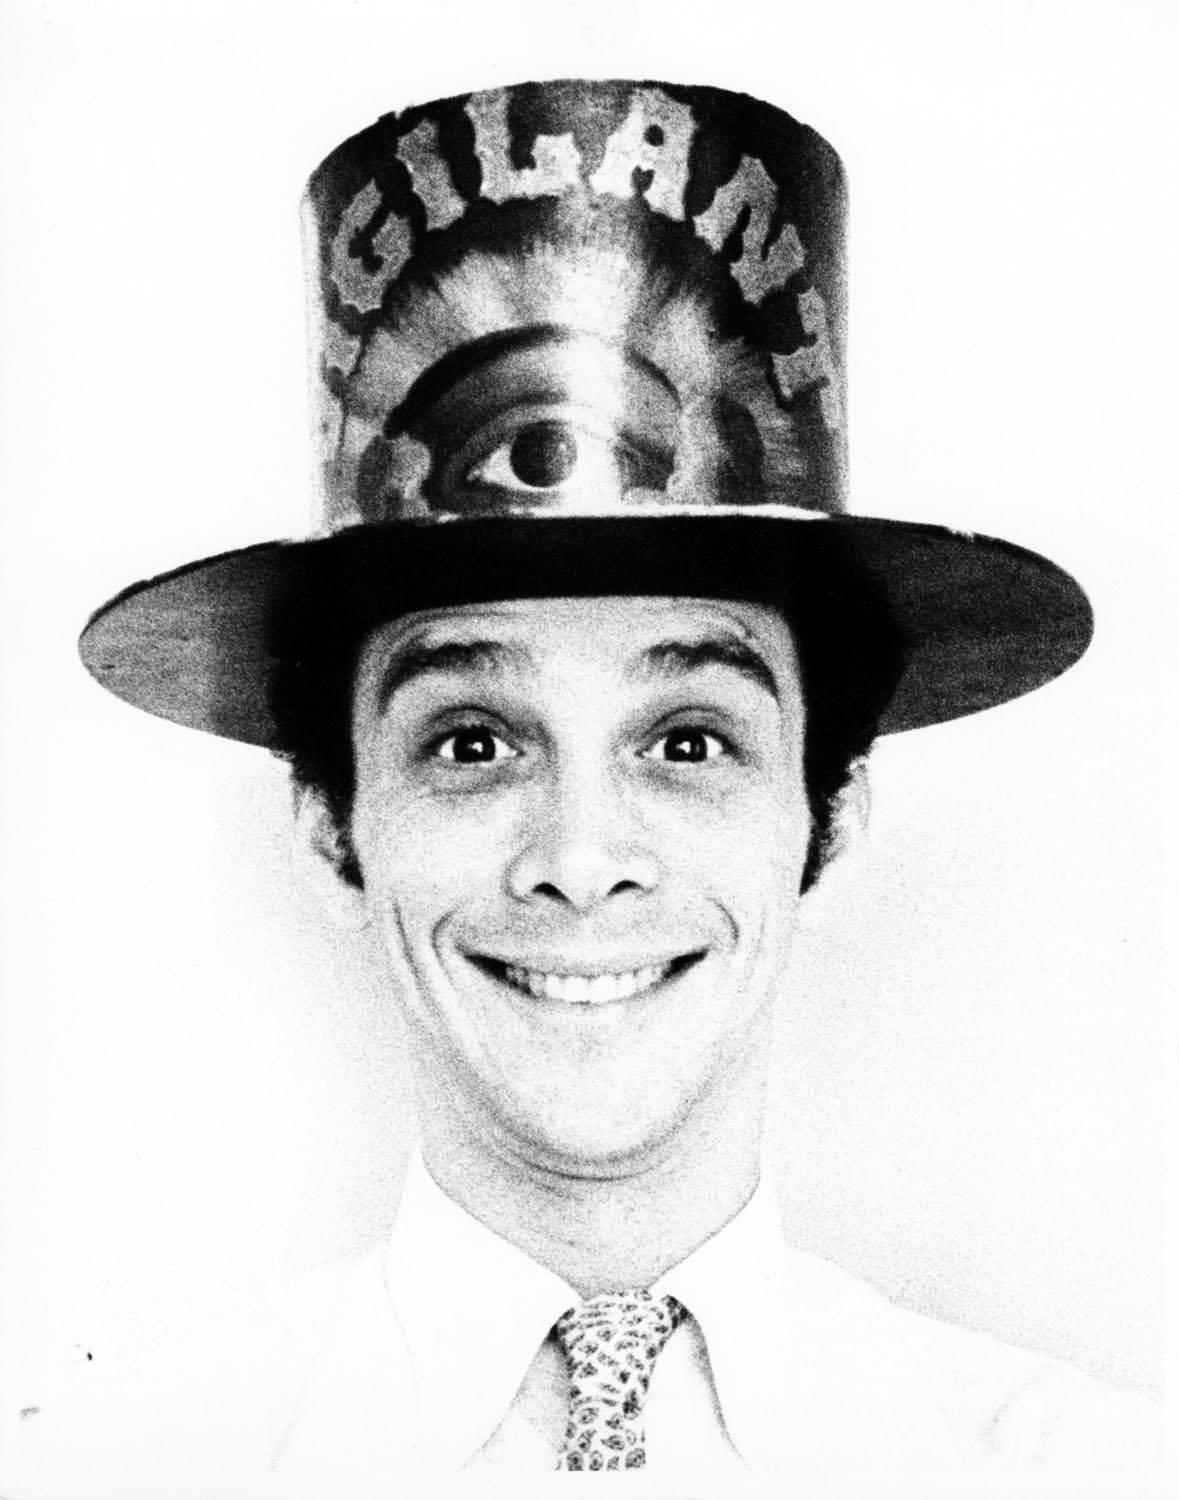 Jack Mitchell Black and White Photograph - Broadway star Joel Grey in costume for 'George M!' 